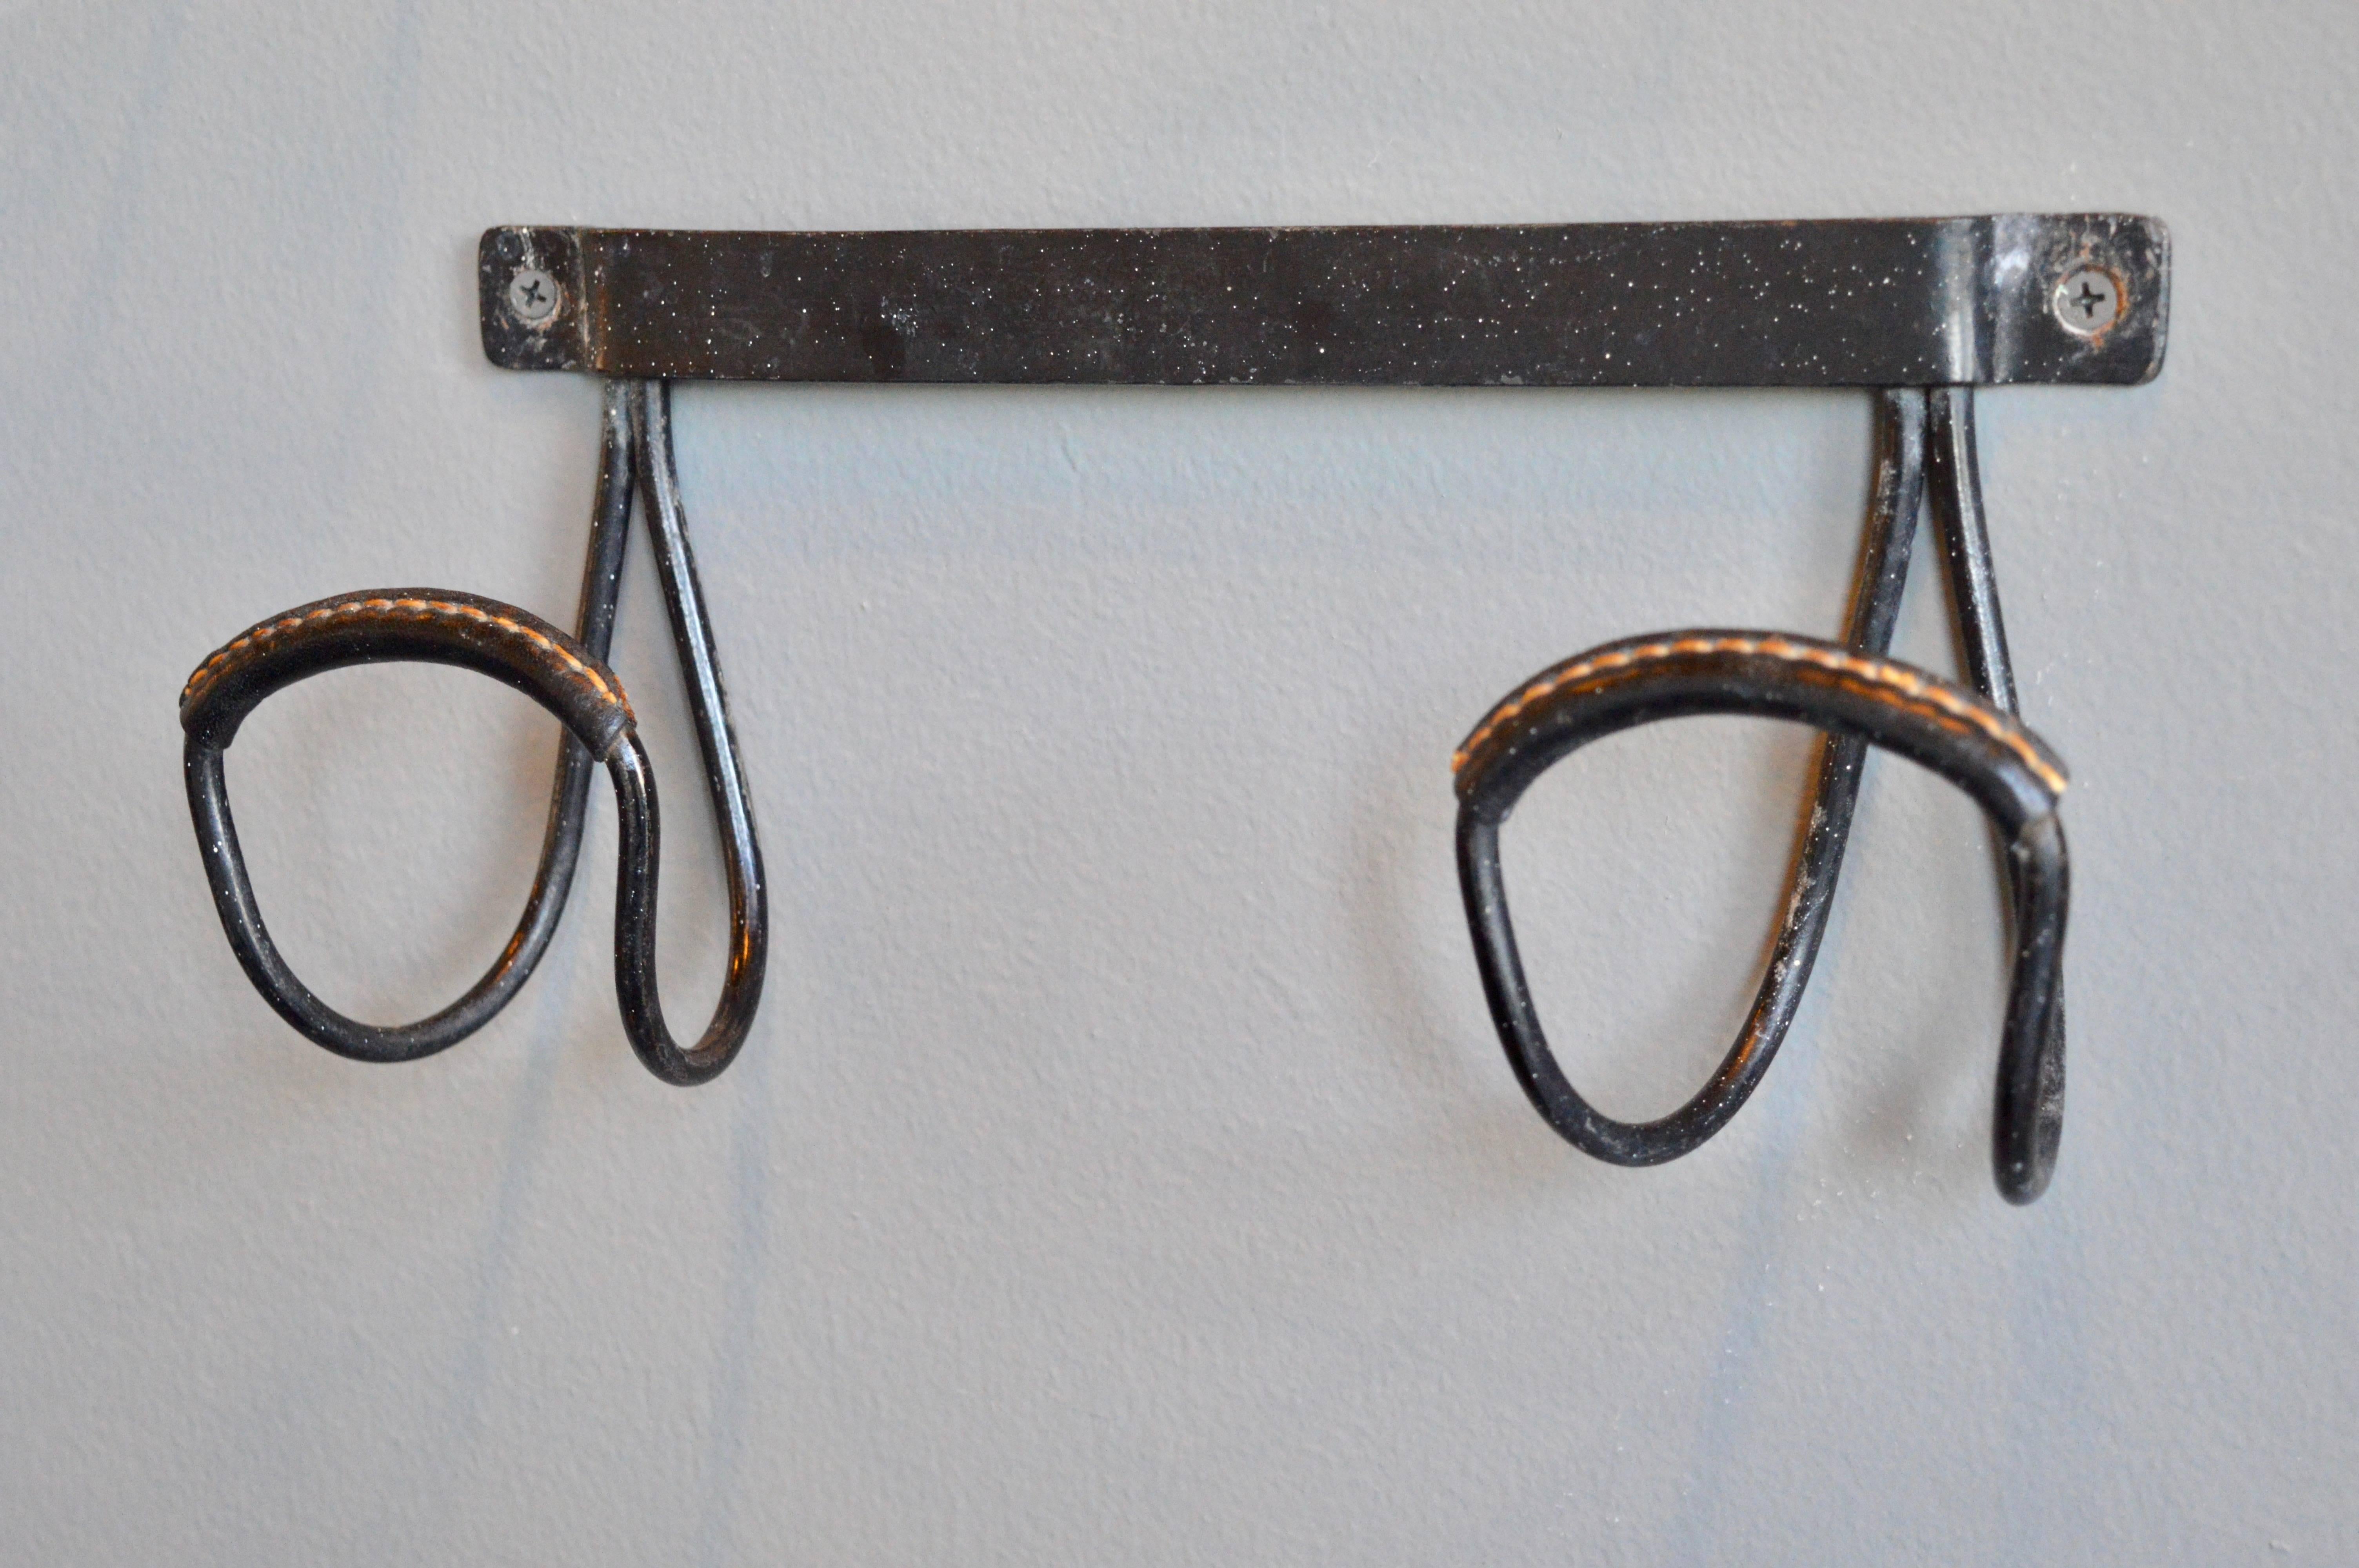 Handsome coat hook by French designer Jacques Adnet. Iron frame with leather wrapped hooks. Black leather with signature contrast stitching. Excellent vintage condition.